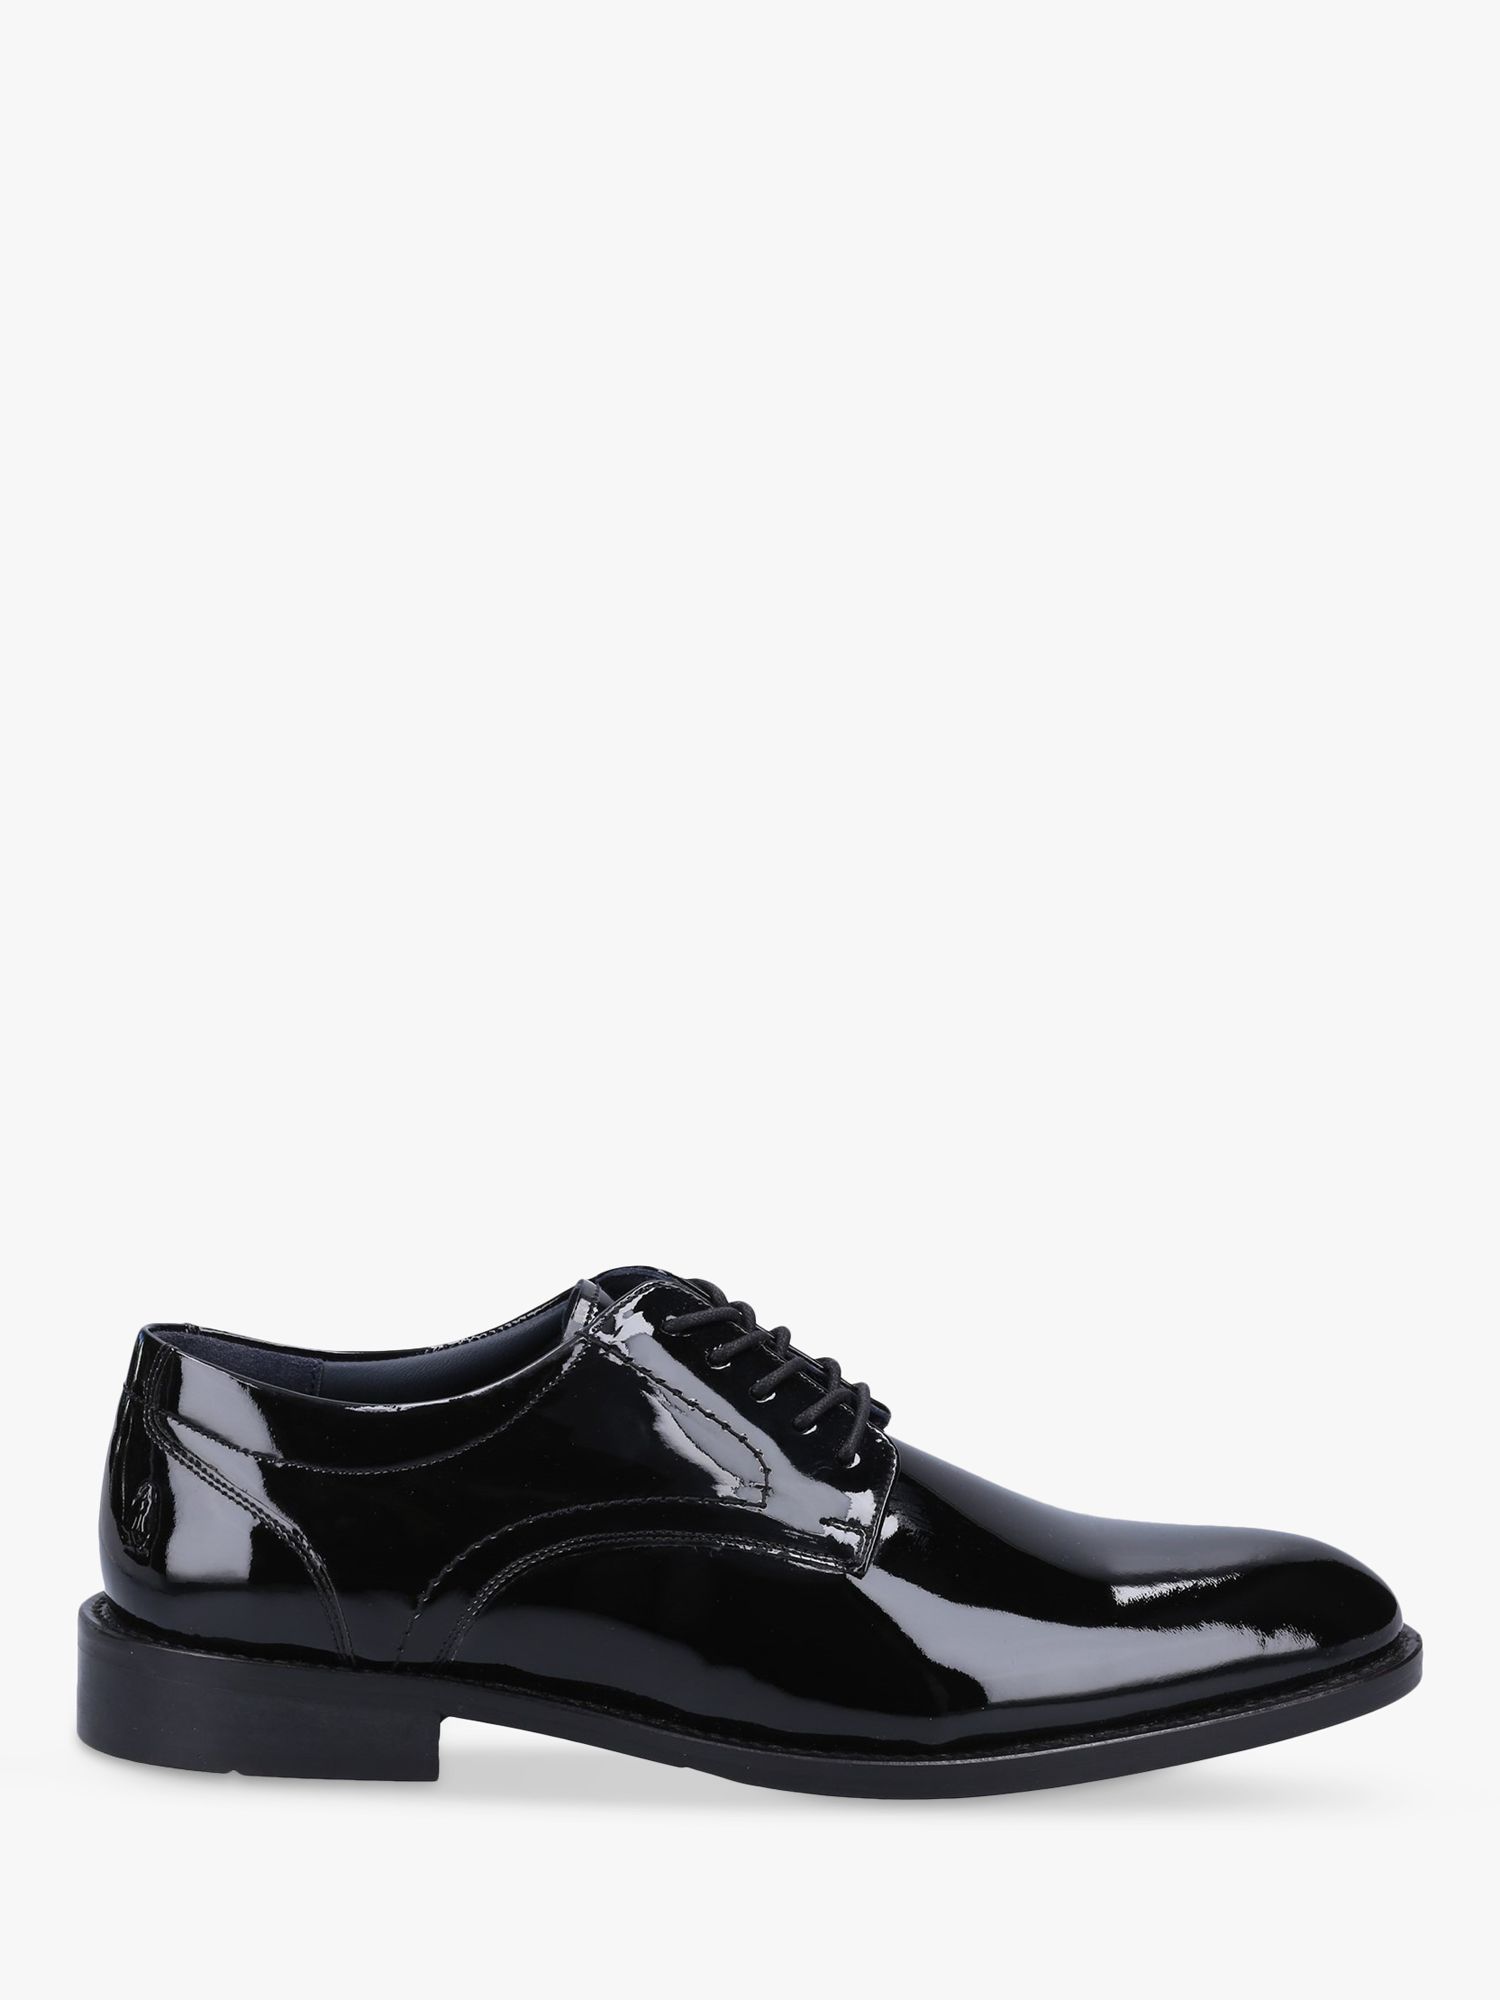 Hush Puppies Damien Patent Leather Lace Up Brogues, Black, 6